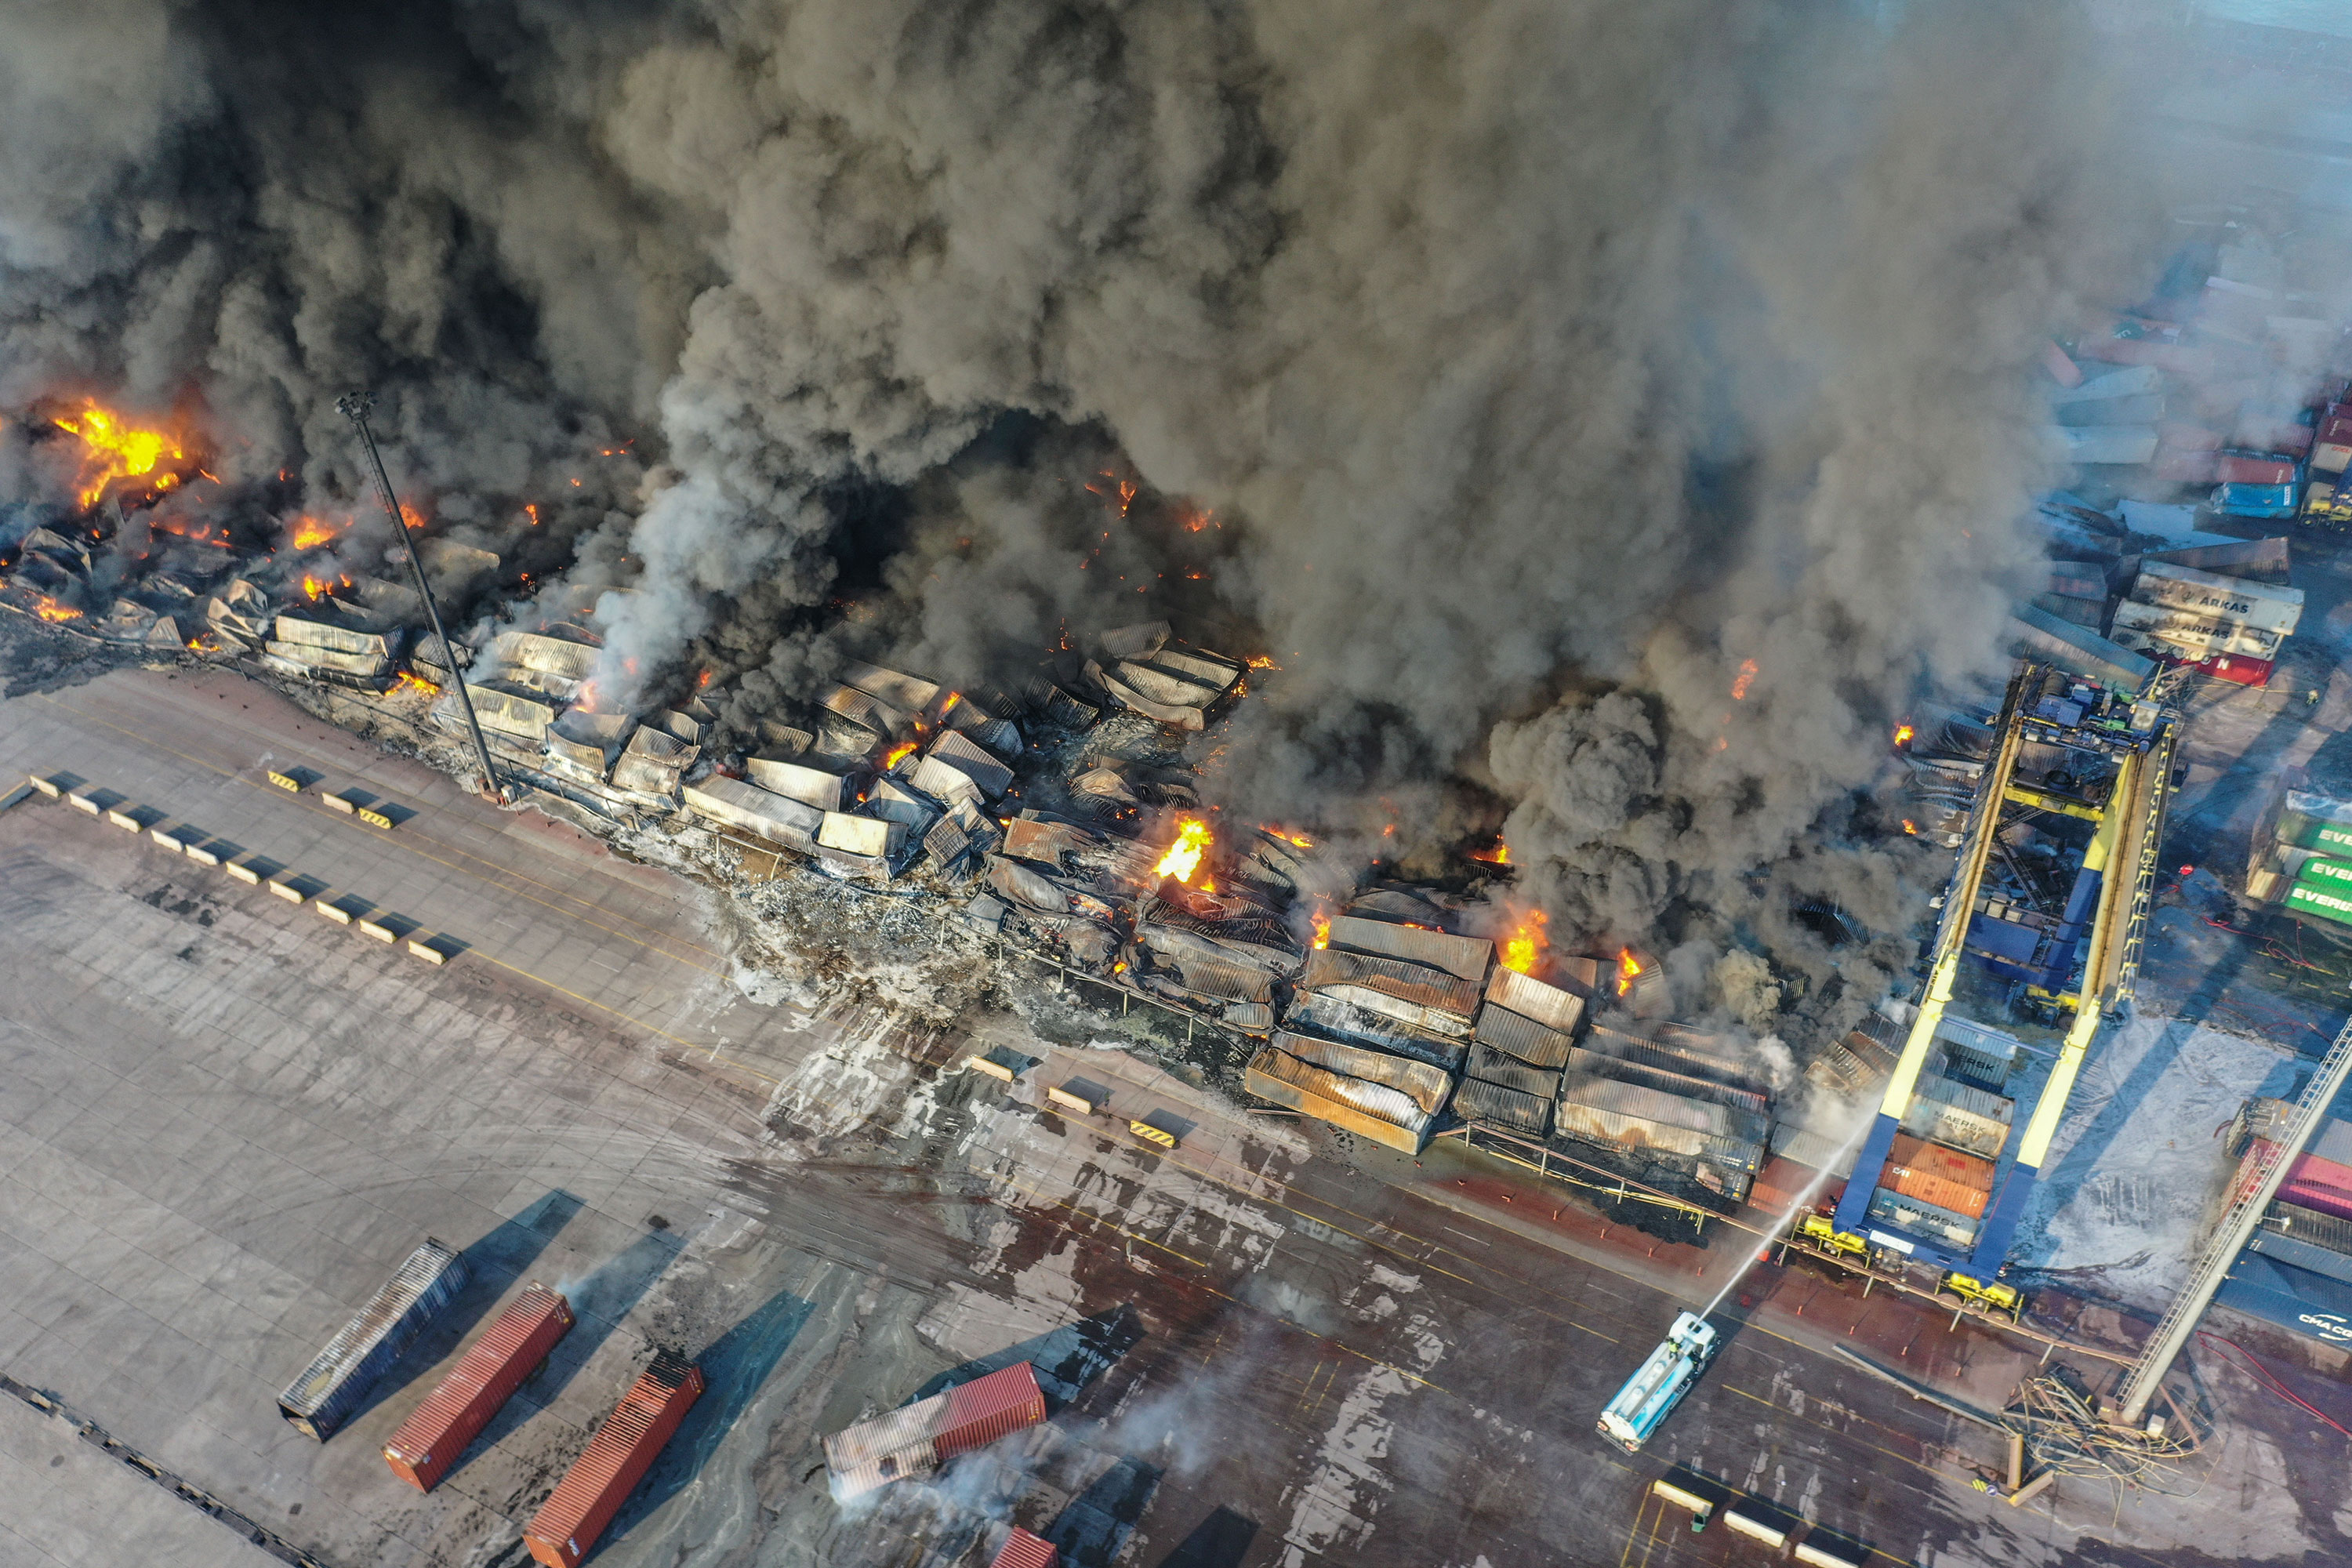 Fires rage at the Iskendurun port as firefighters try to extinguish the flames in Hatay Province, Turkey, on Wednesday.